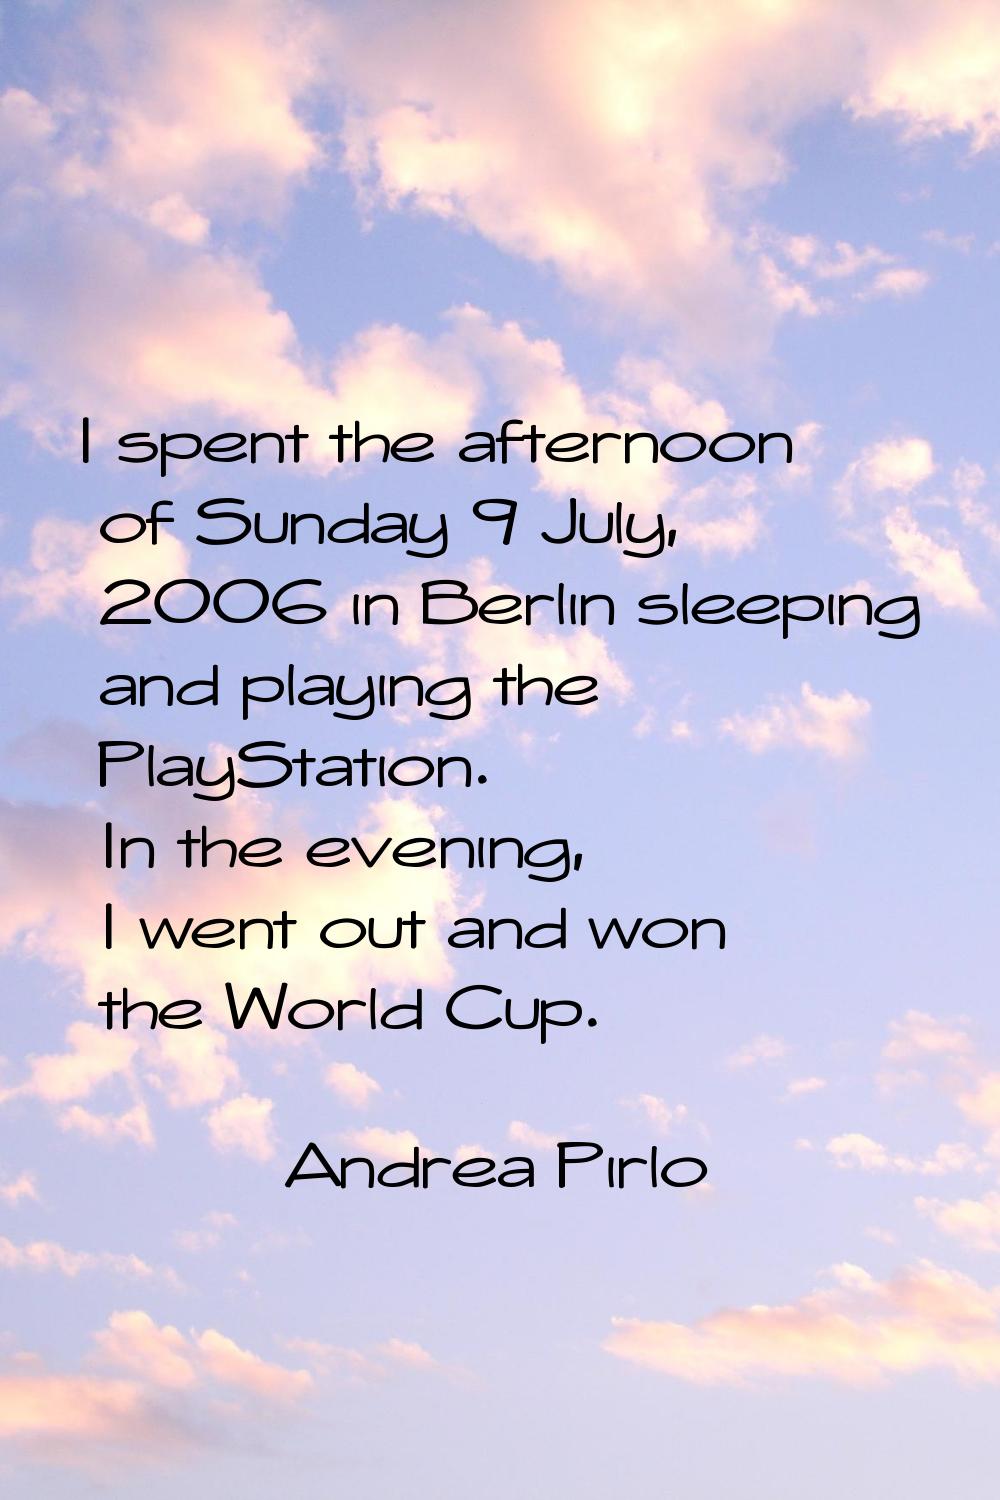 I spent the afternoon of Sunday 9 July, 2006 in Berlin sleeping and playing the PlayStation. In the